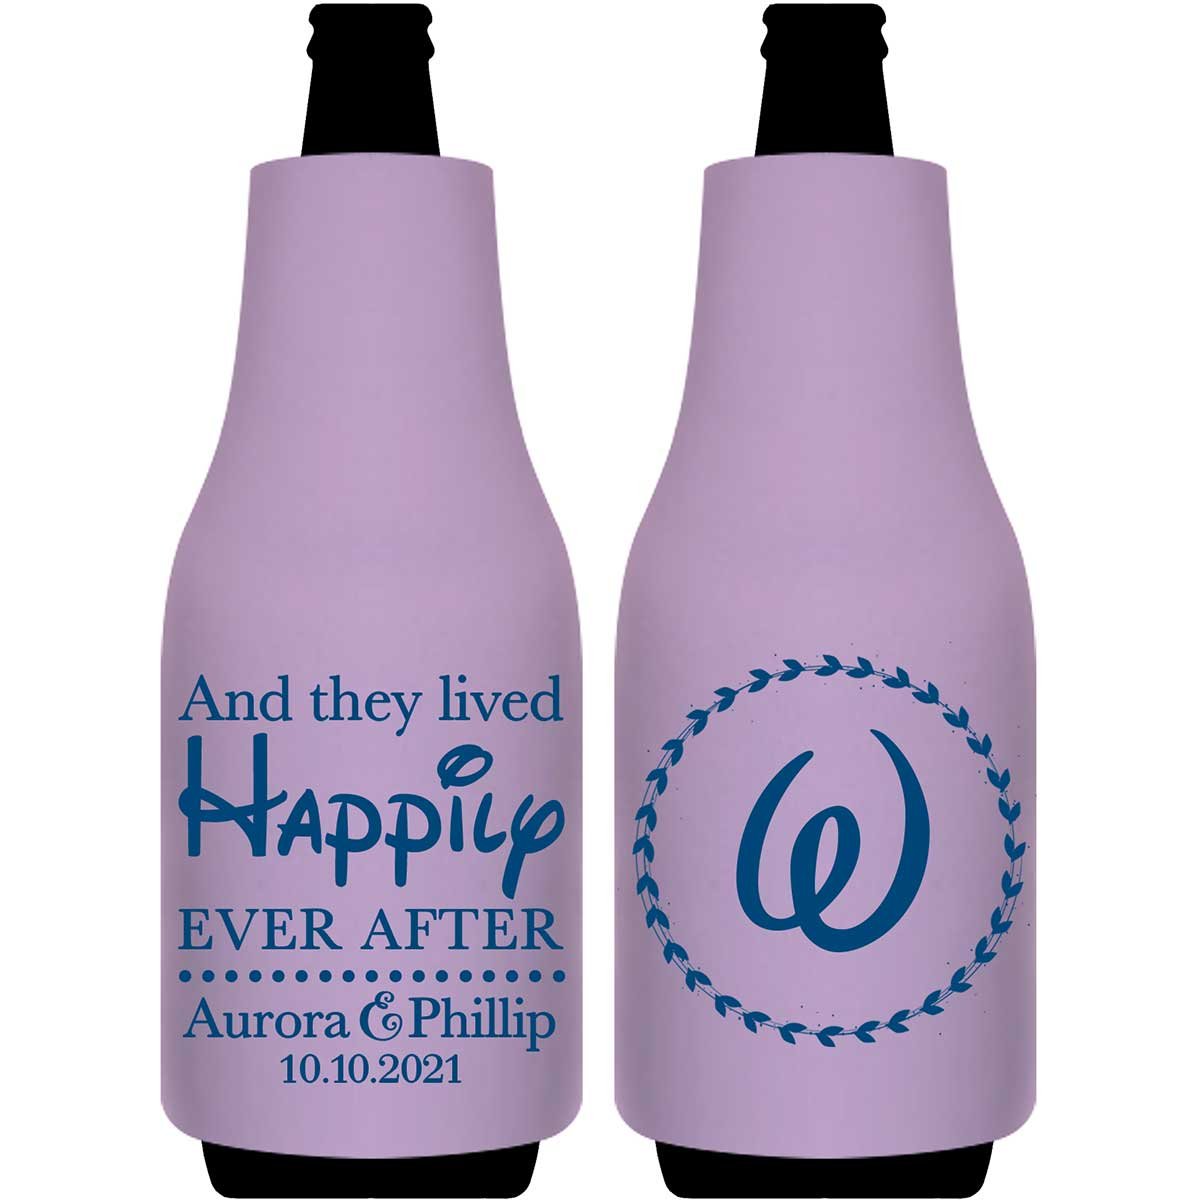 And They Lived Happily Ever After 1A Foldable Bottle Sleeve Koozies Wedding Gifts for Guests